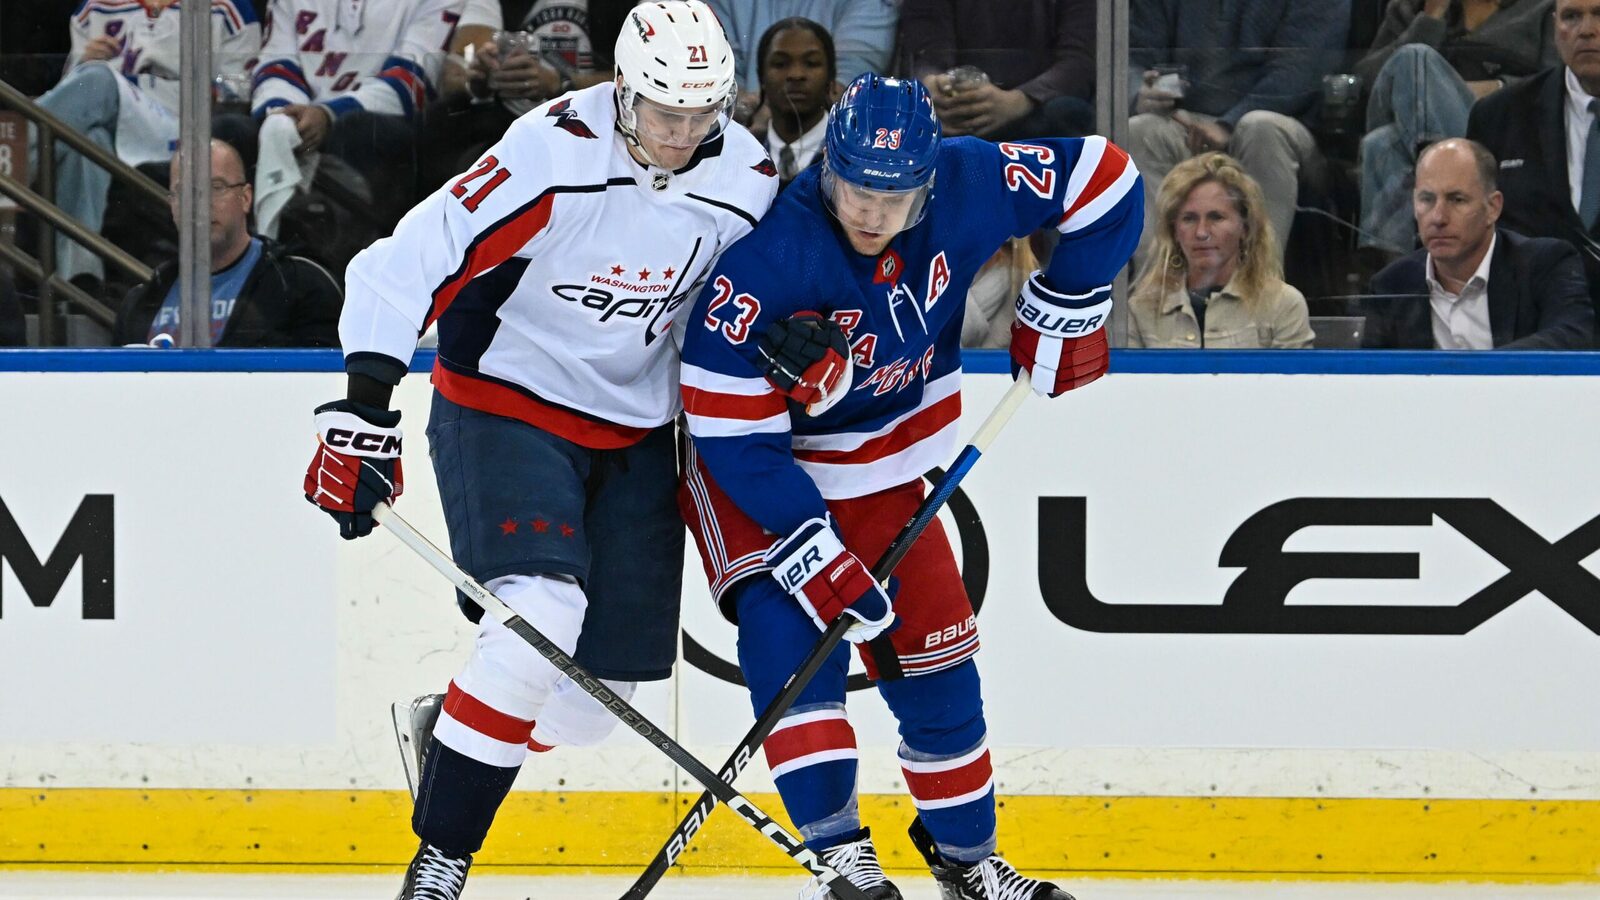 The Washington Capitals aren’t going to back down despite 2-0 series deficit to Rangers